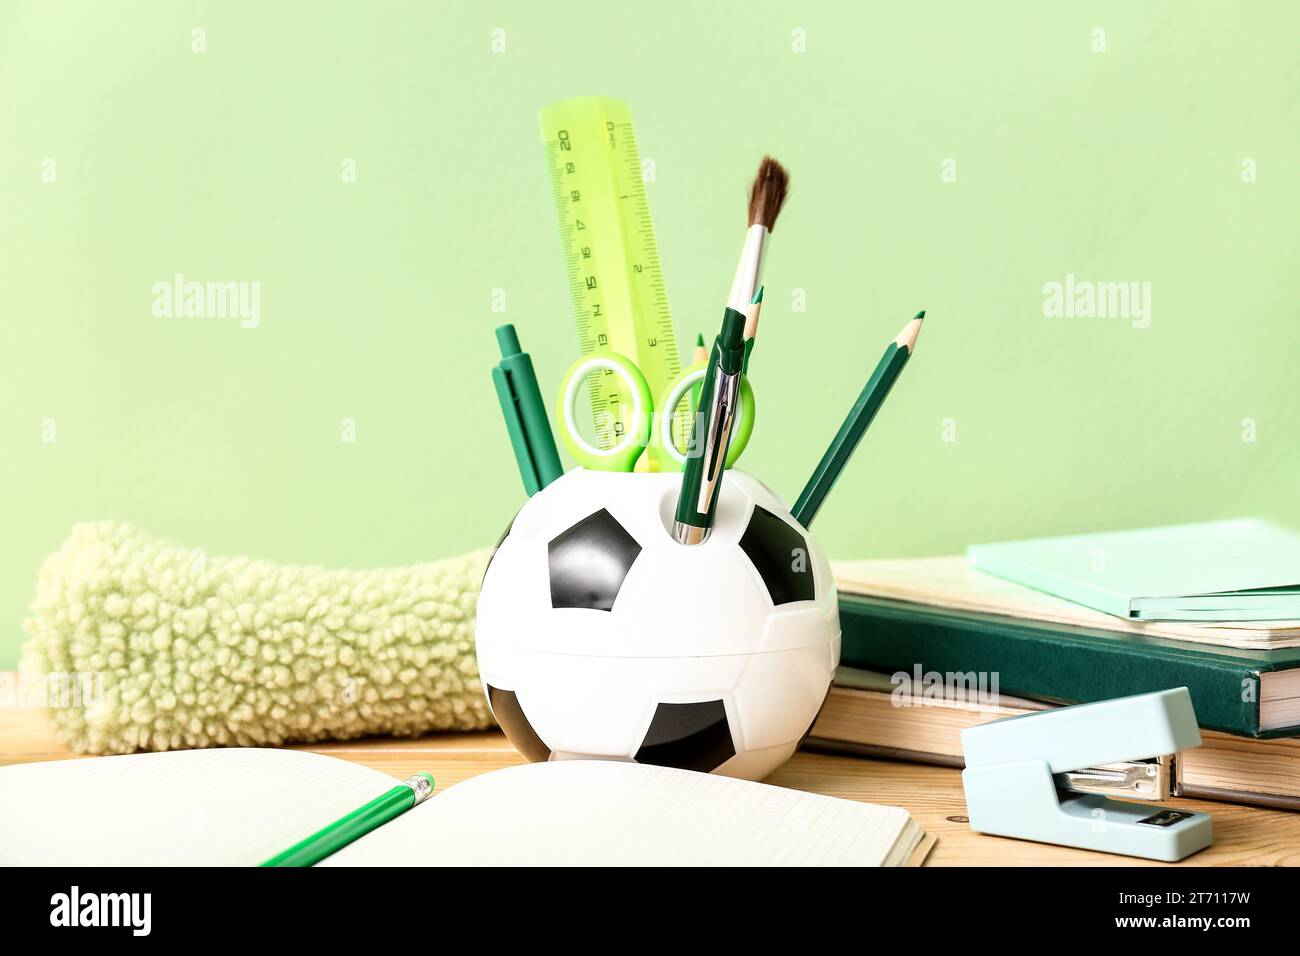 Holder in shape of soccer ball with different stationery and notebooks on wooden desk, closeup Stock Photo